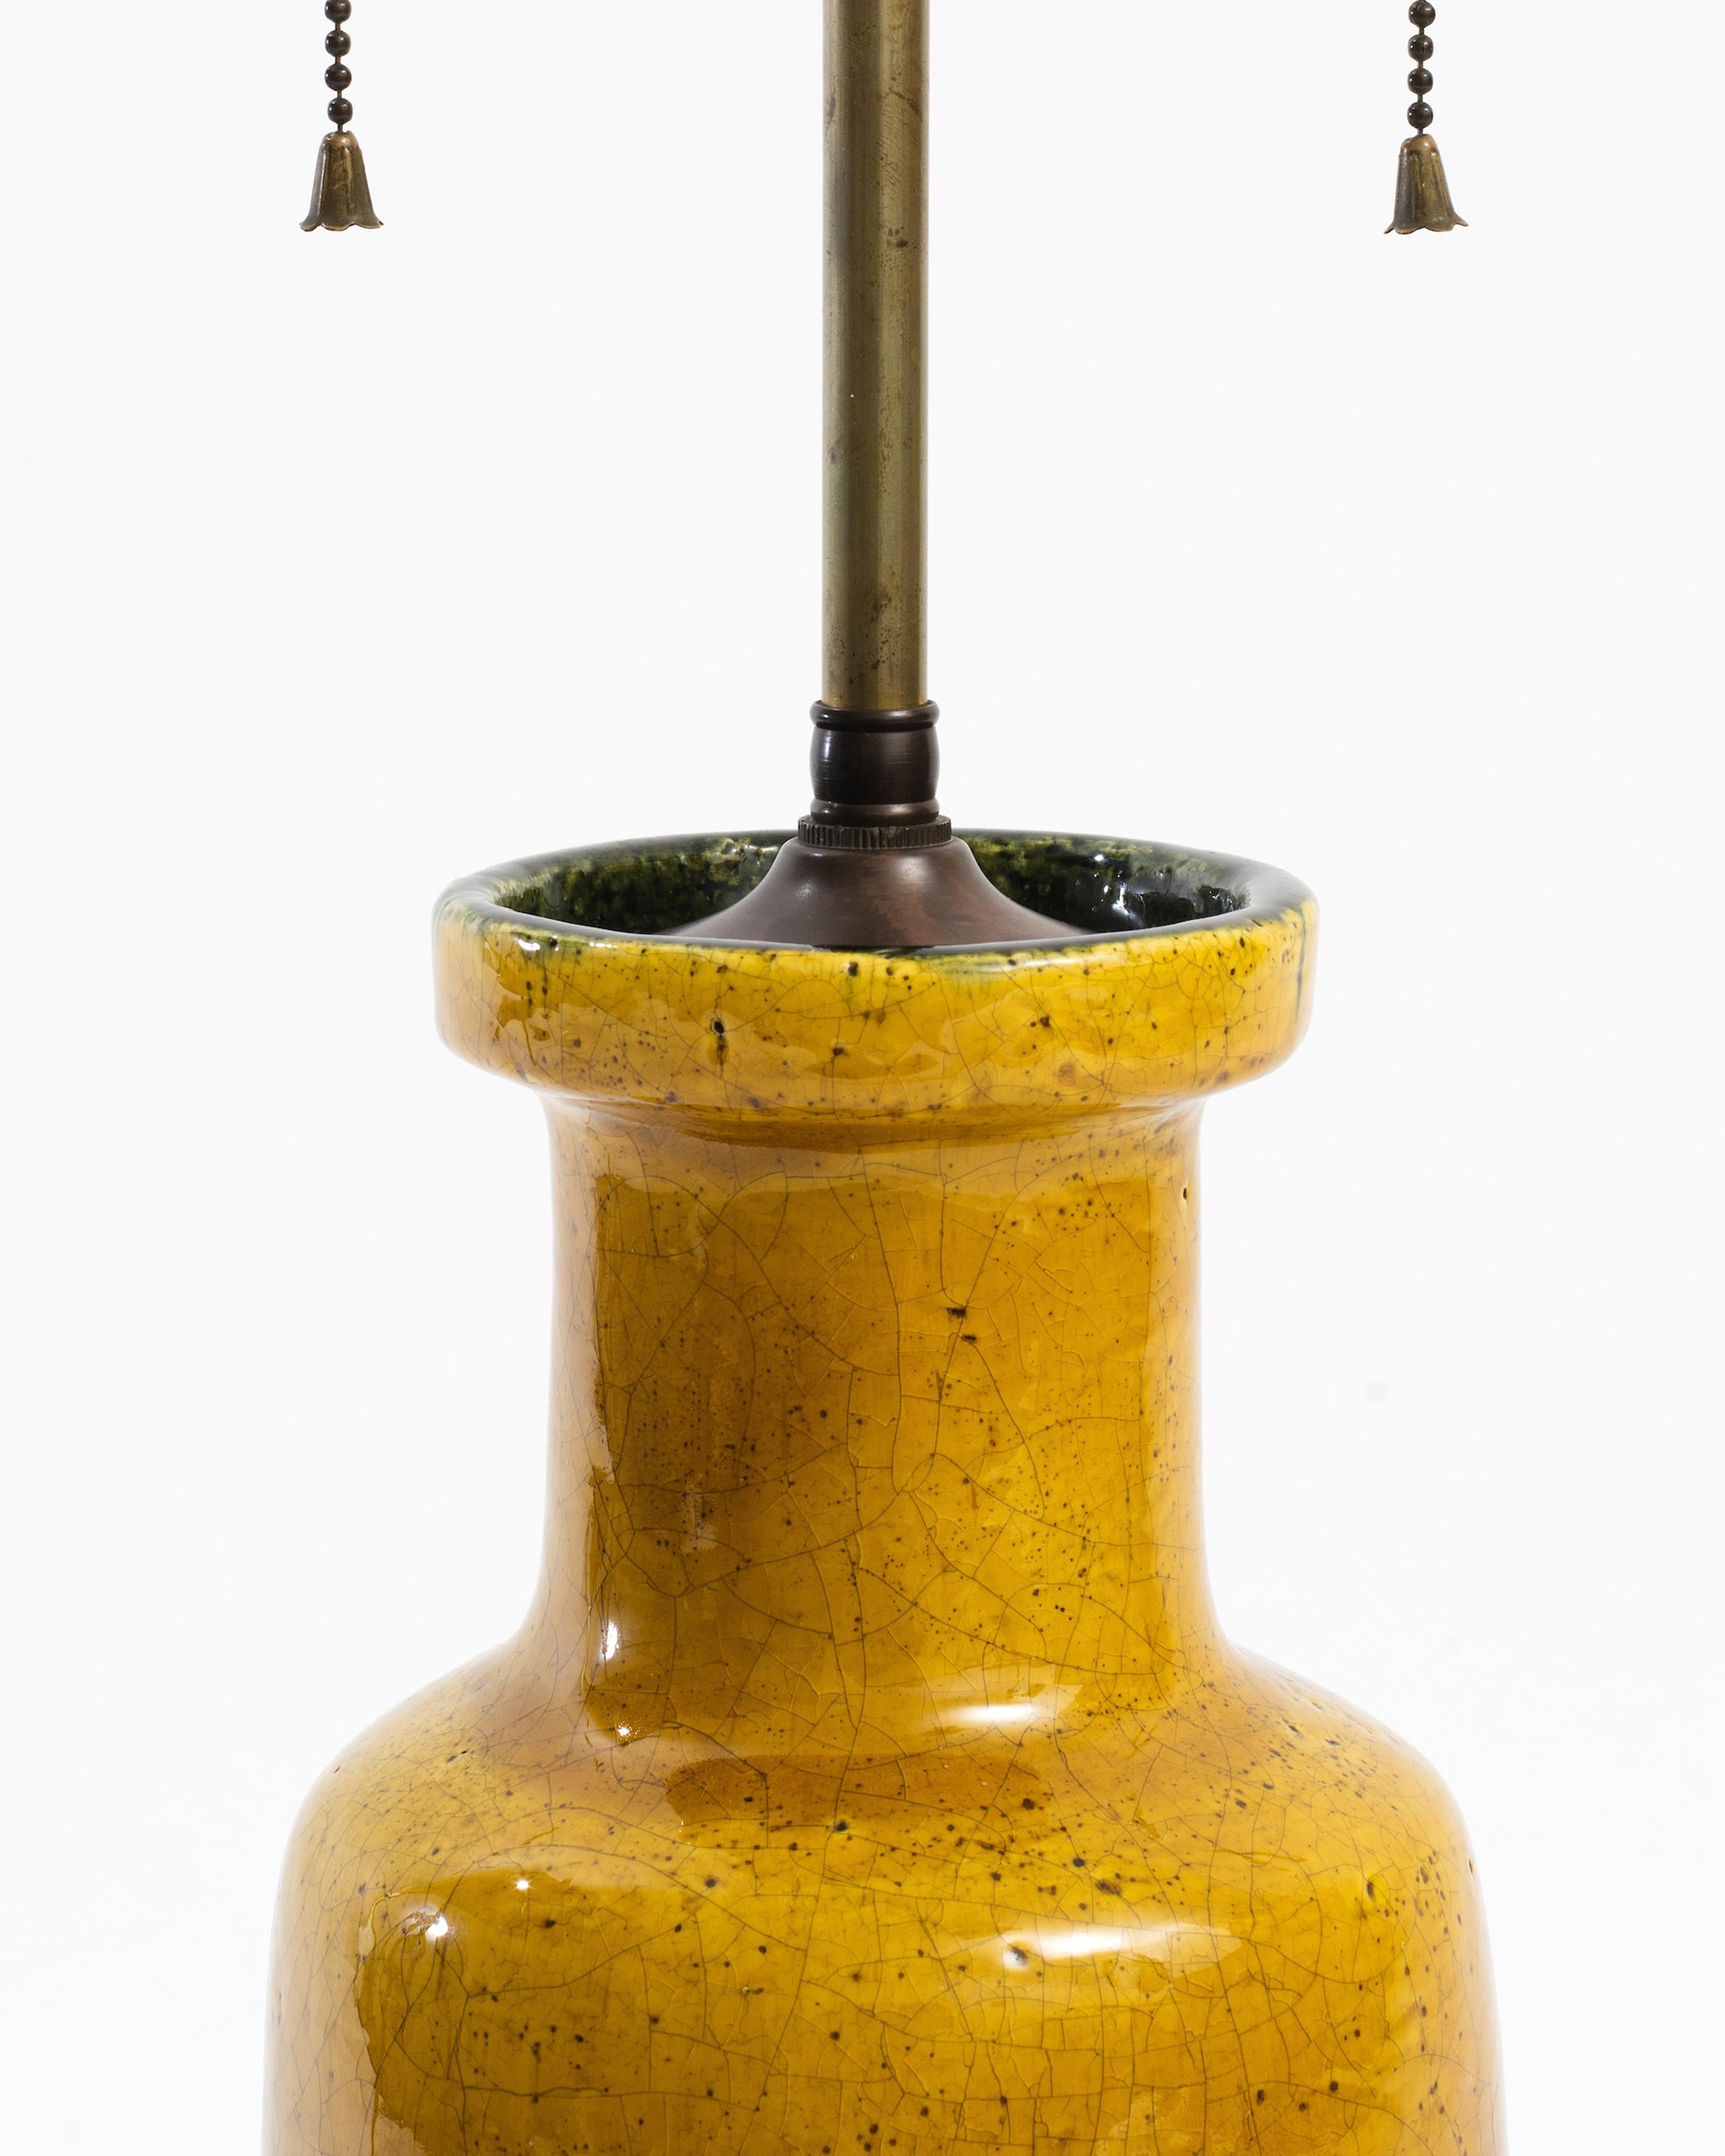 American Modernist Ochre Glazed Ceramic Table Lamp with Patinated Brass Hardware, 1950s